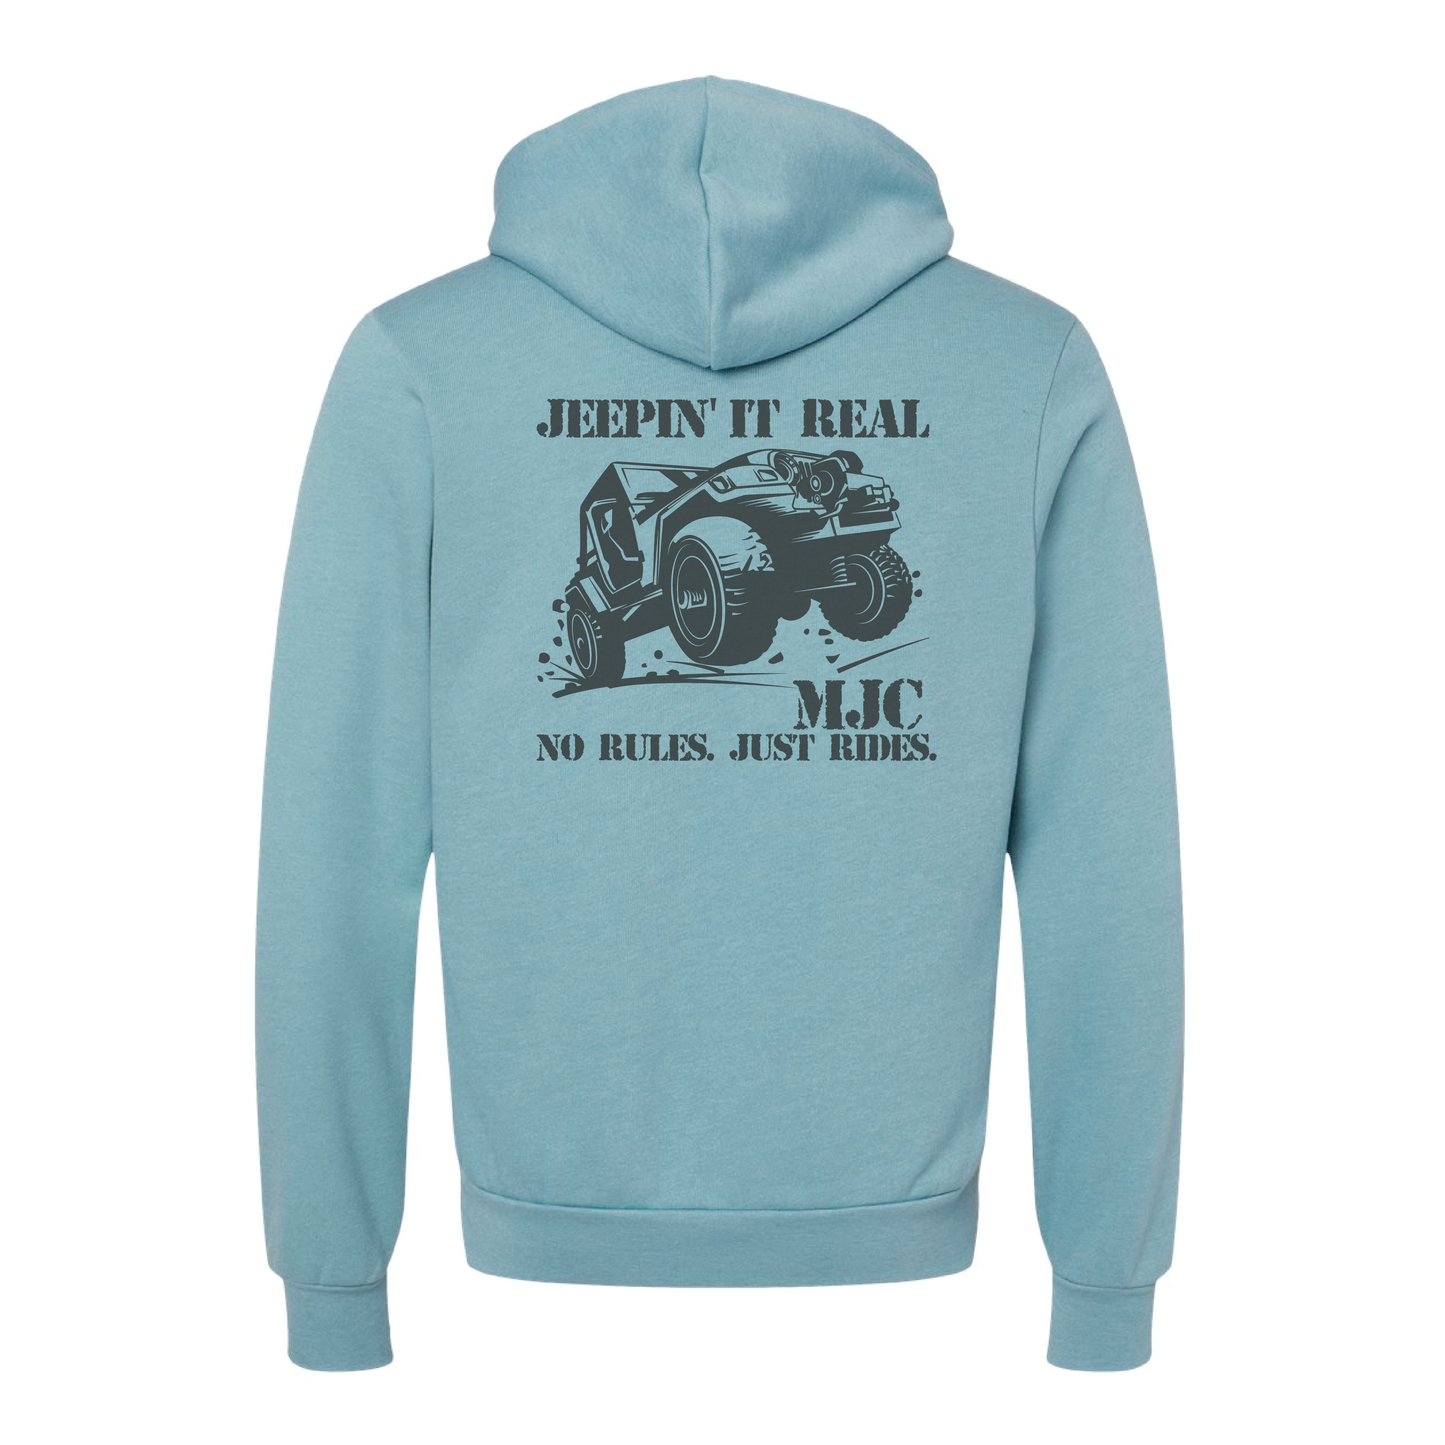 Motley Jeep Crew - Shirt, Tank Top, Long Sleeve or Hoodie - Available in Multiple Colors